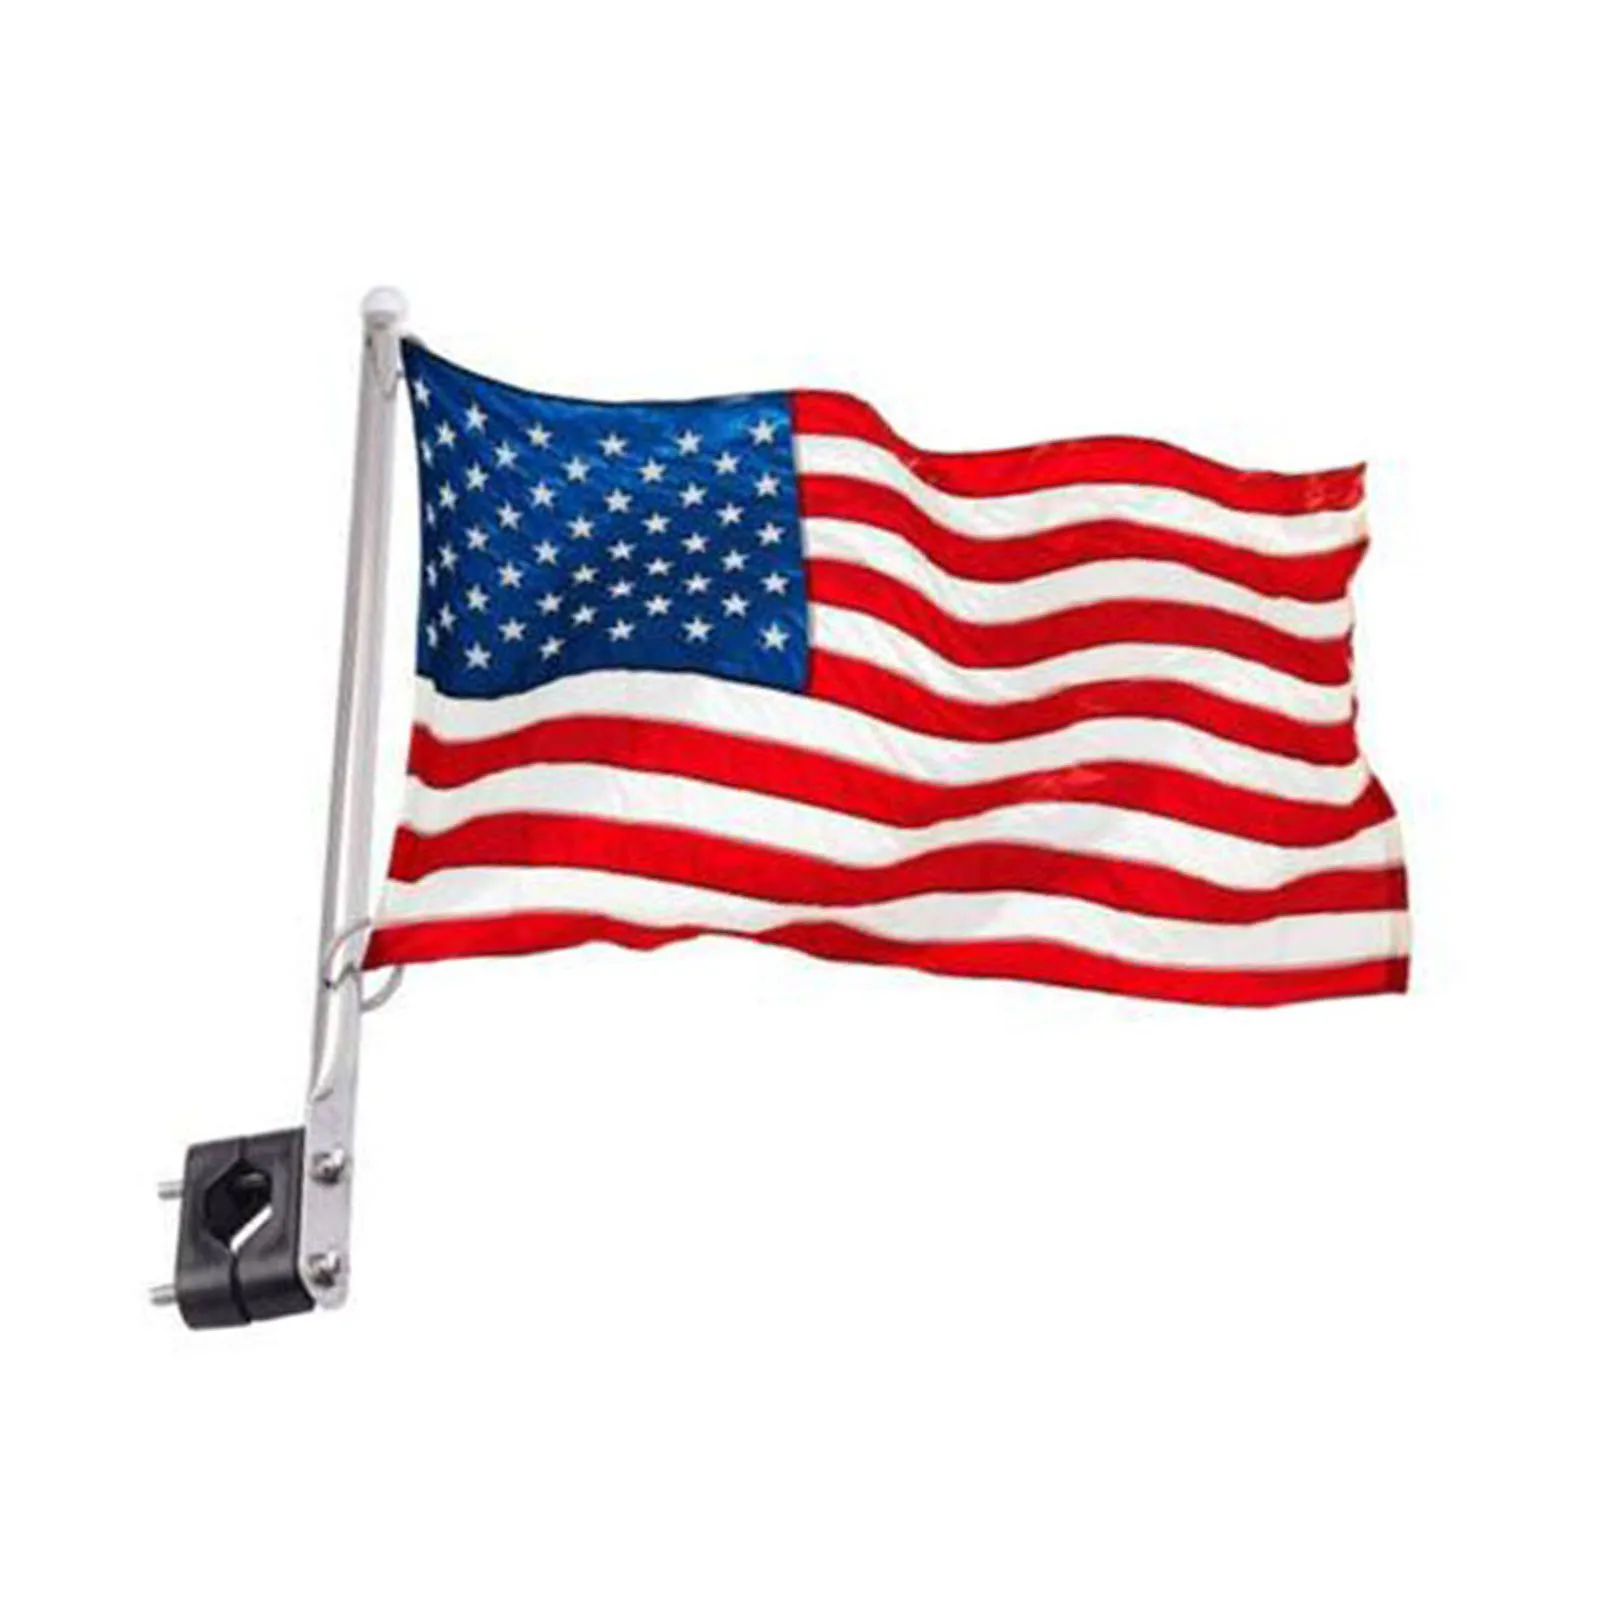 Marine 304 Stainless Steel 14 inch with US Flag Pole for 7/8